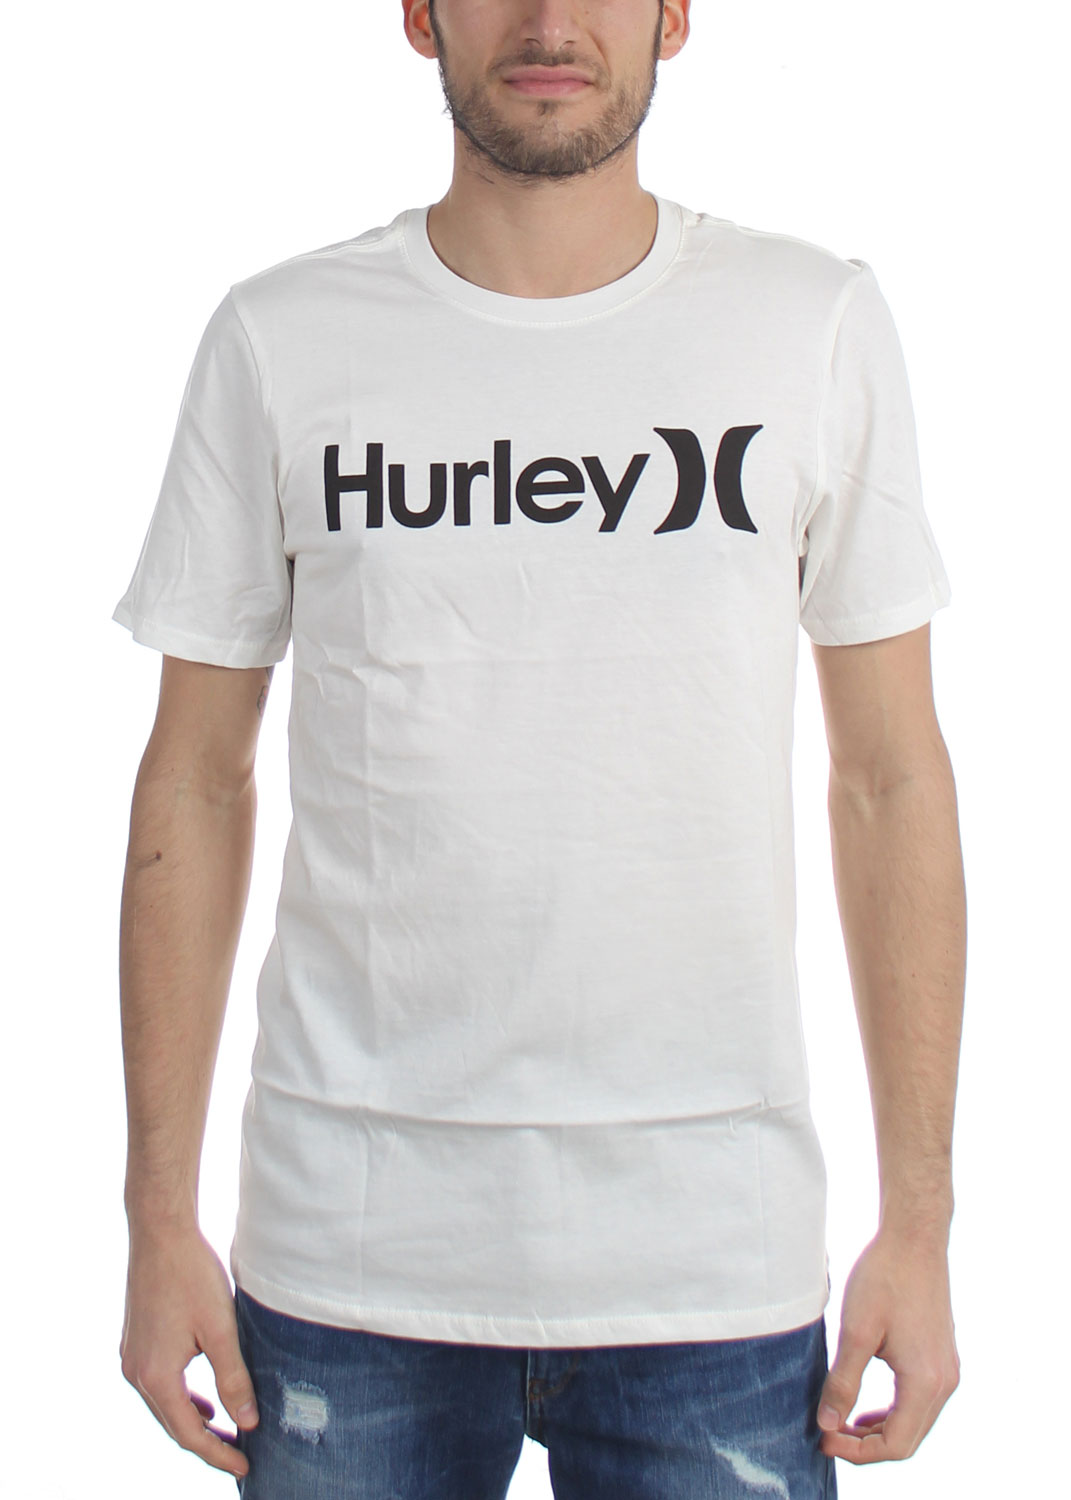 Hurley - Mens One And Only Color Premium t-shirt